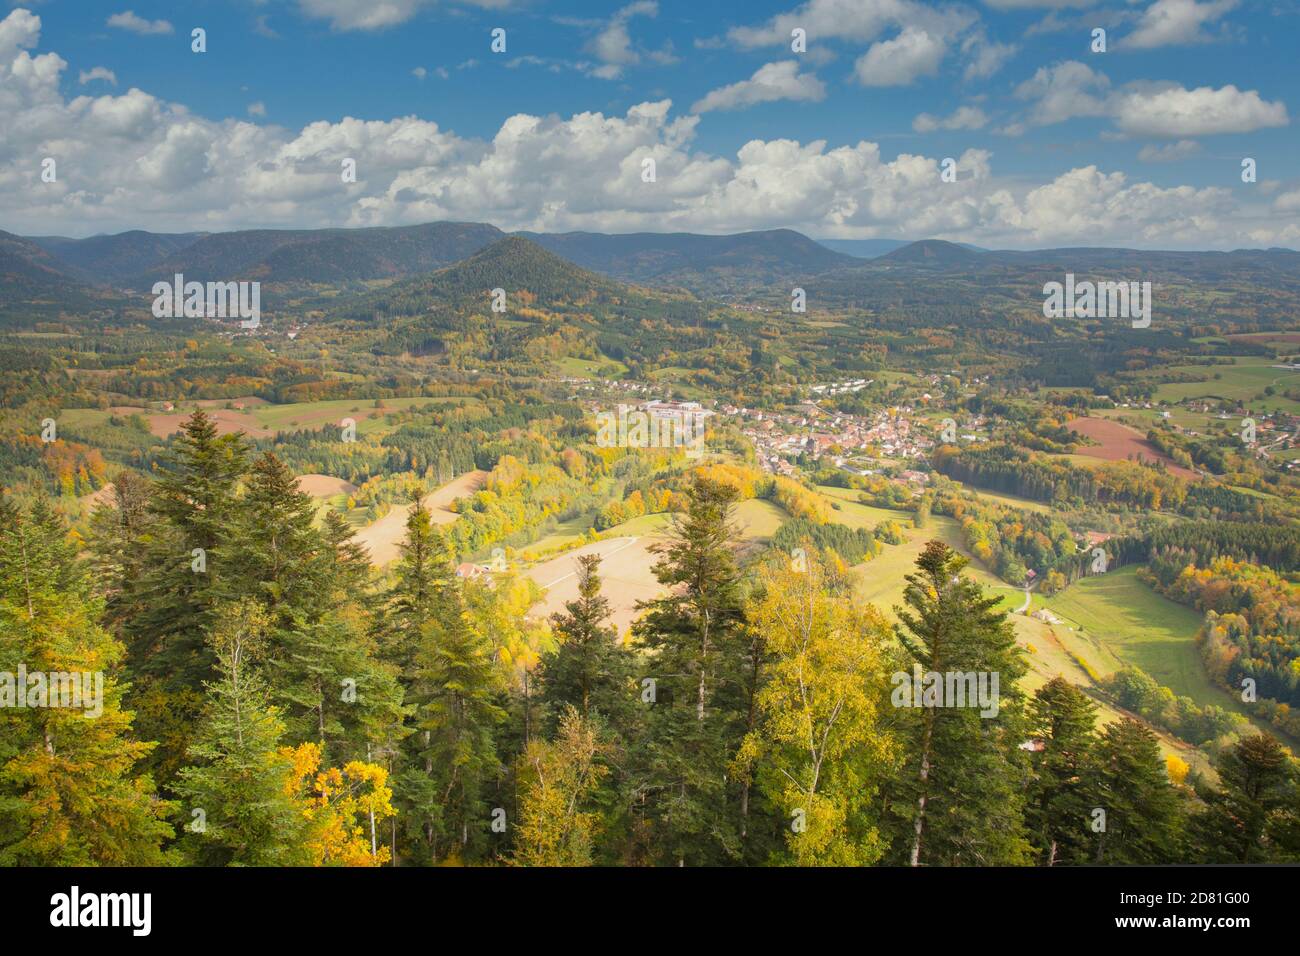 View to the landscape of Senones in the vosges mountain in france Stock Photo